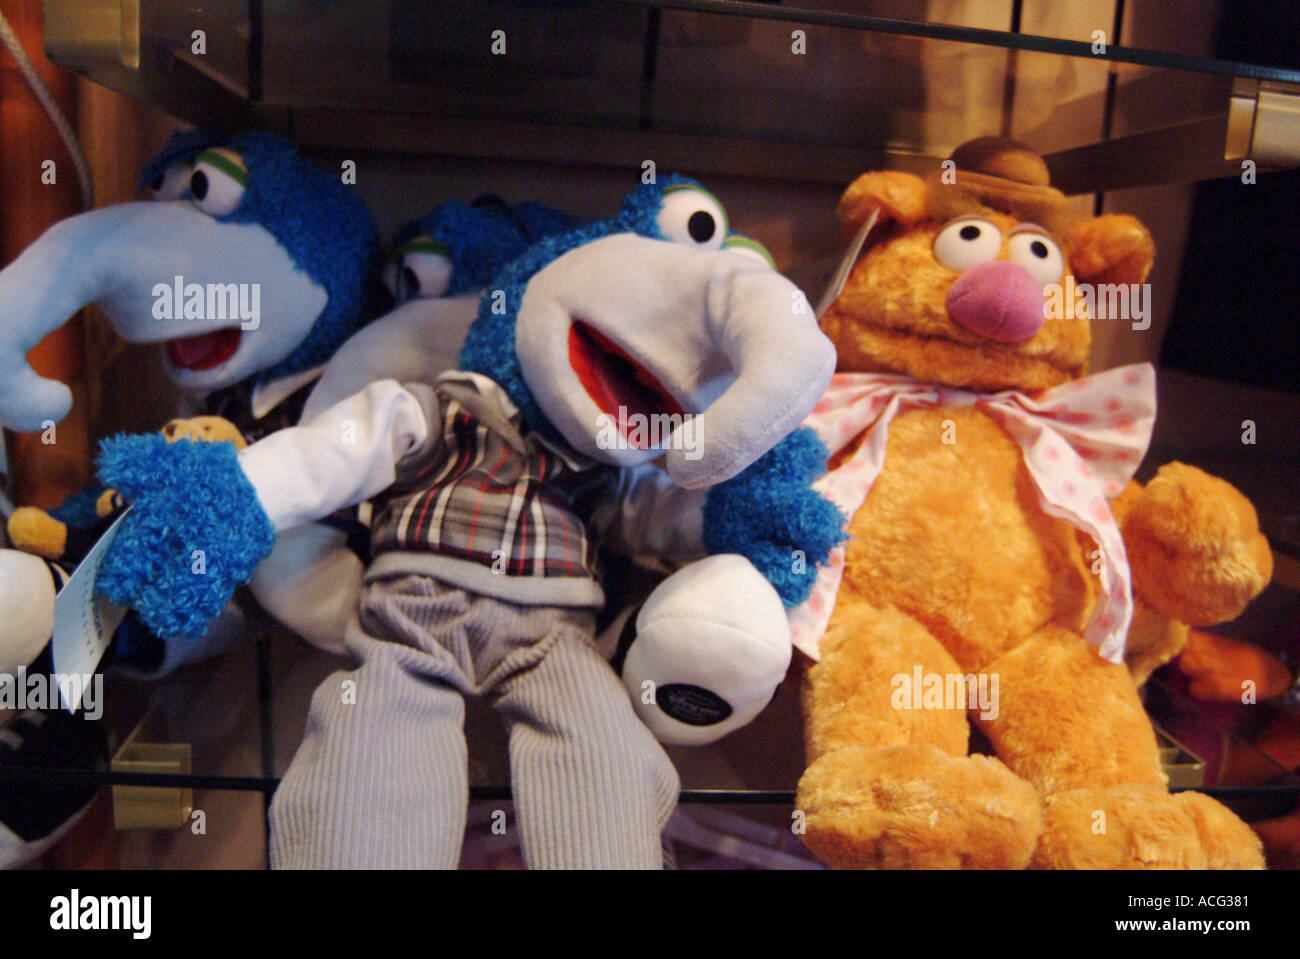 Soft toys from The Muppets on a store shelf Stock Photo